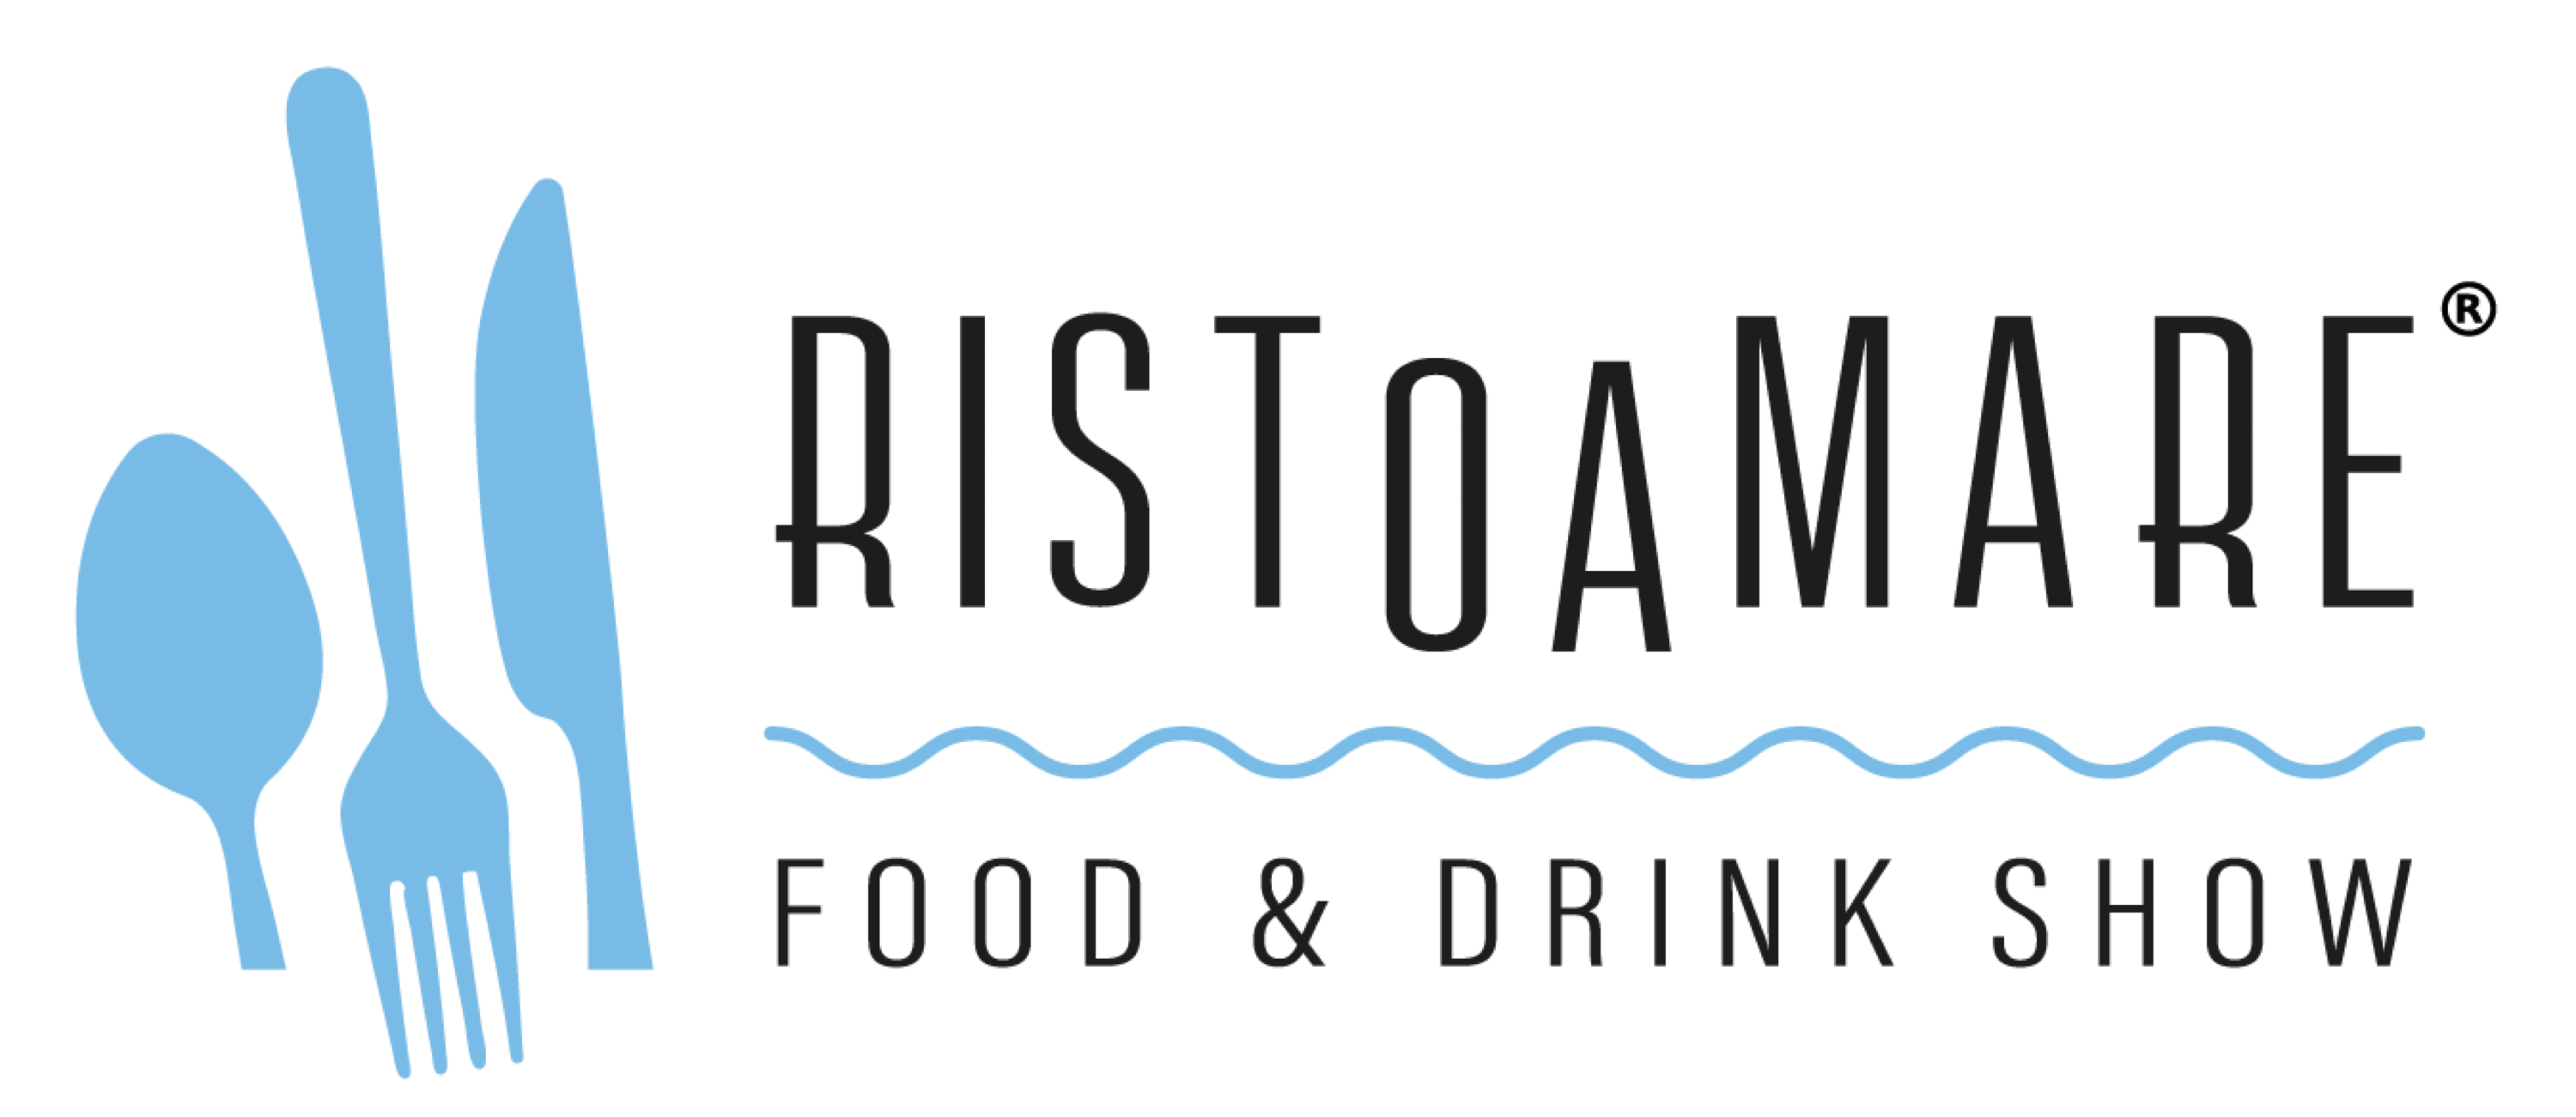 Ristoamare ® - Food and Drink Show